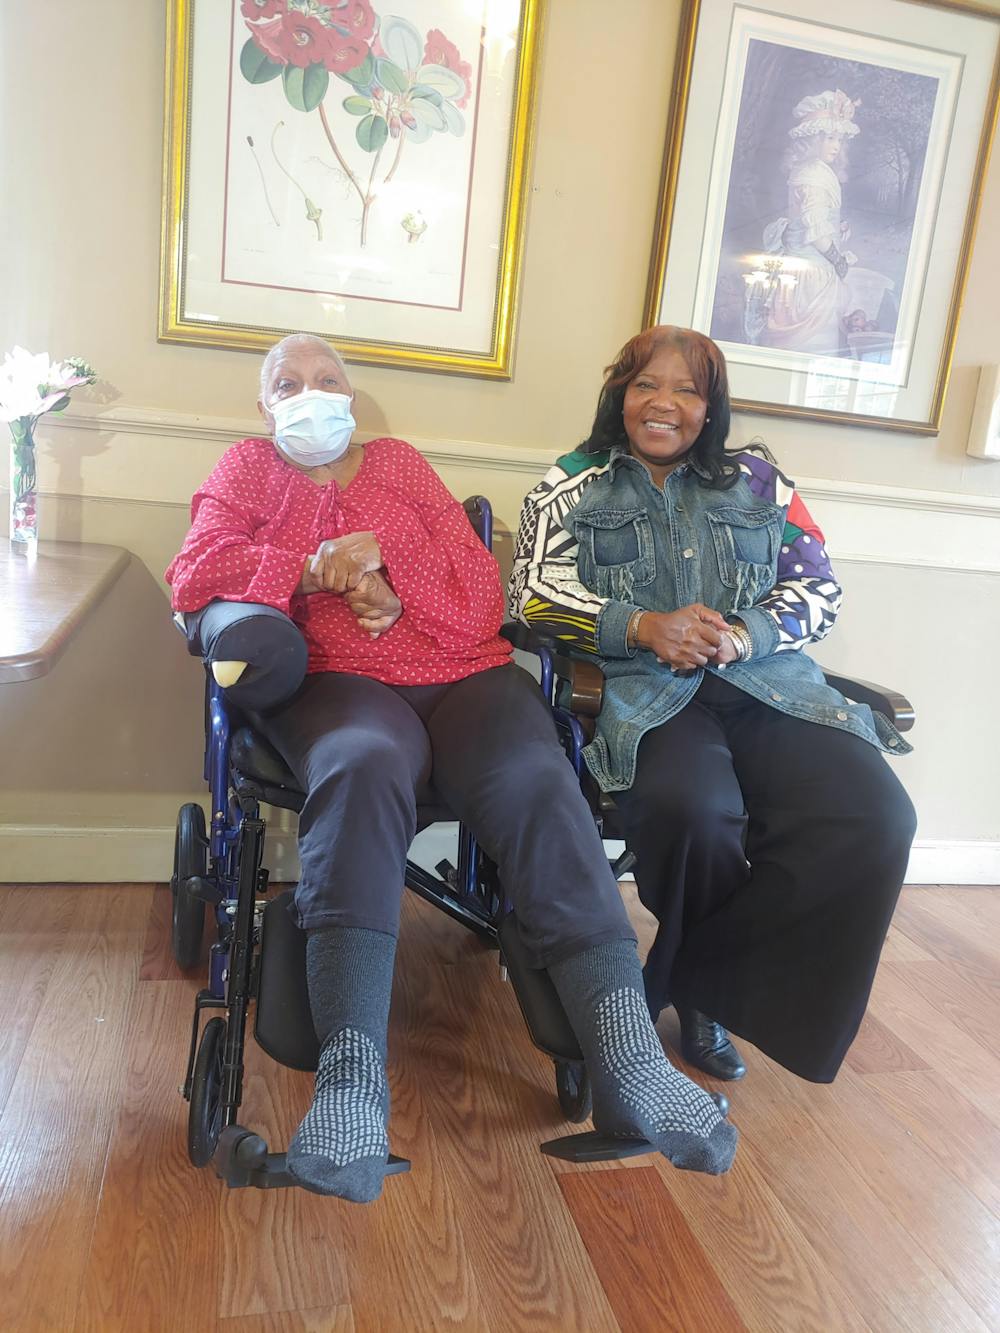 Wendy Cooper and her mother, an Alzheimer's patient, sitting together.